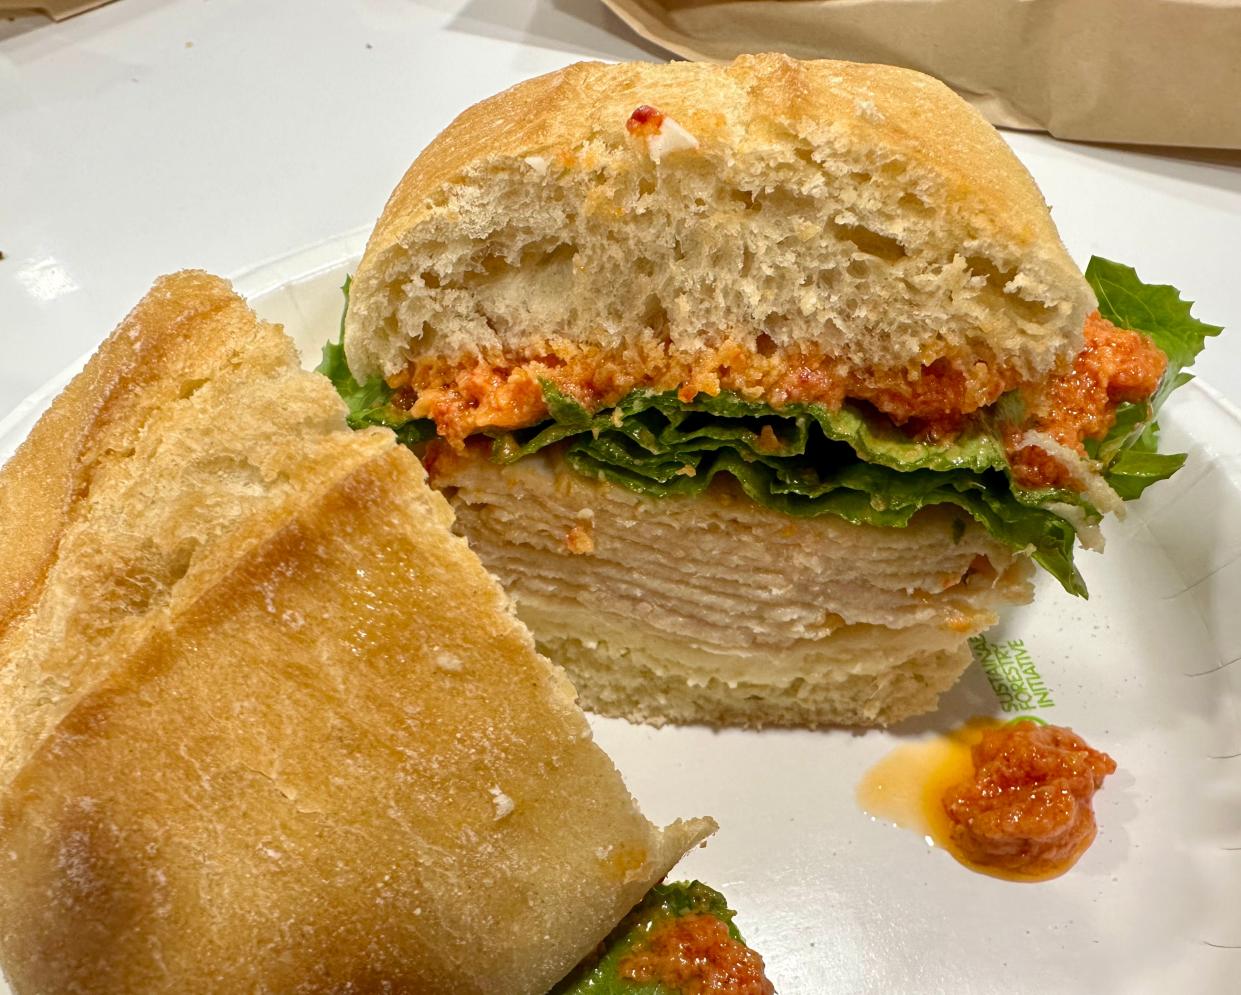 A stacked turkey breast and swiss sandwich with lettuce and a sun-dried tomato spread is served cold on a ciabatta roll at Costco food court.